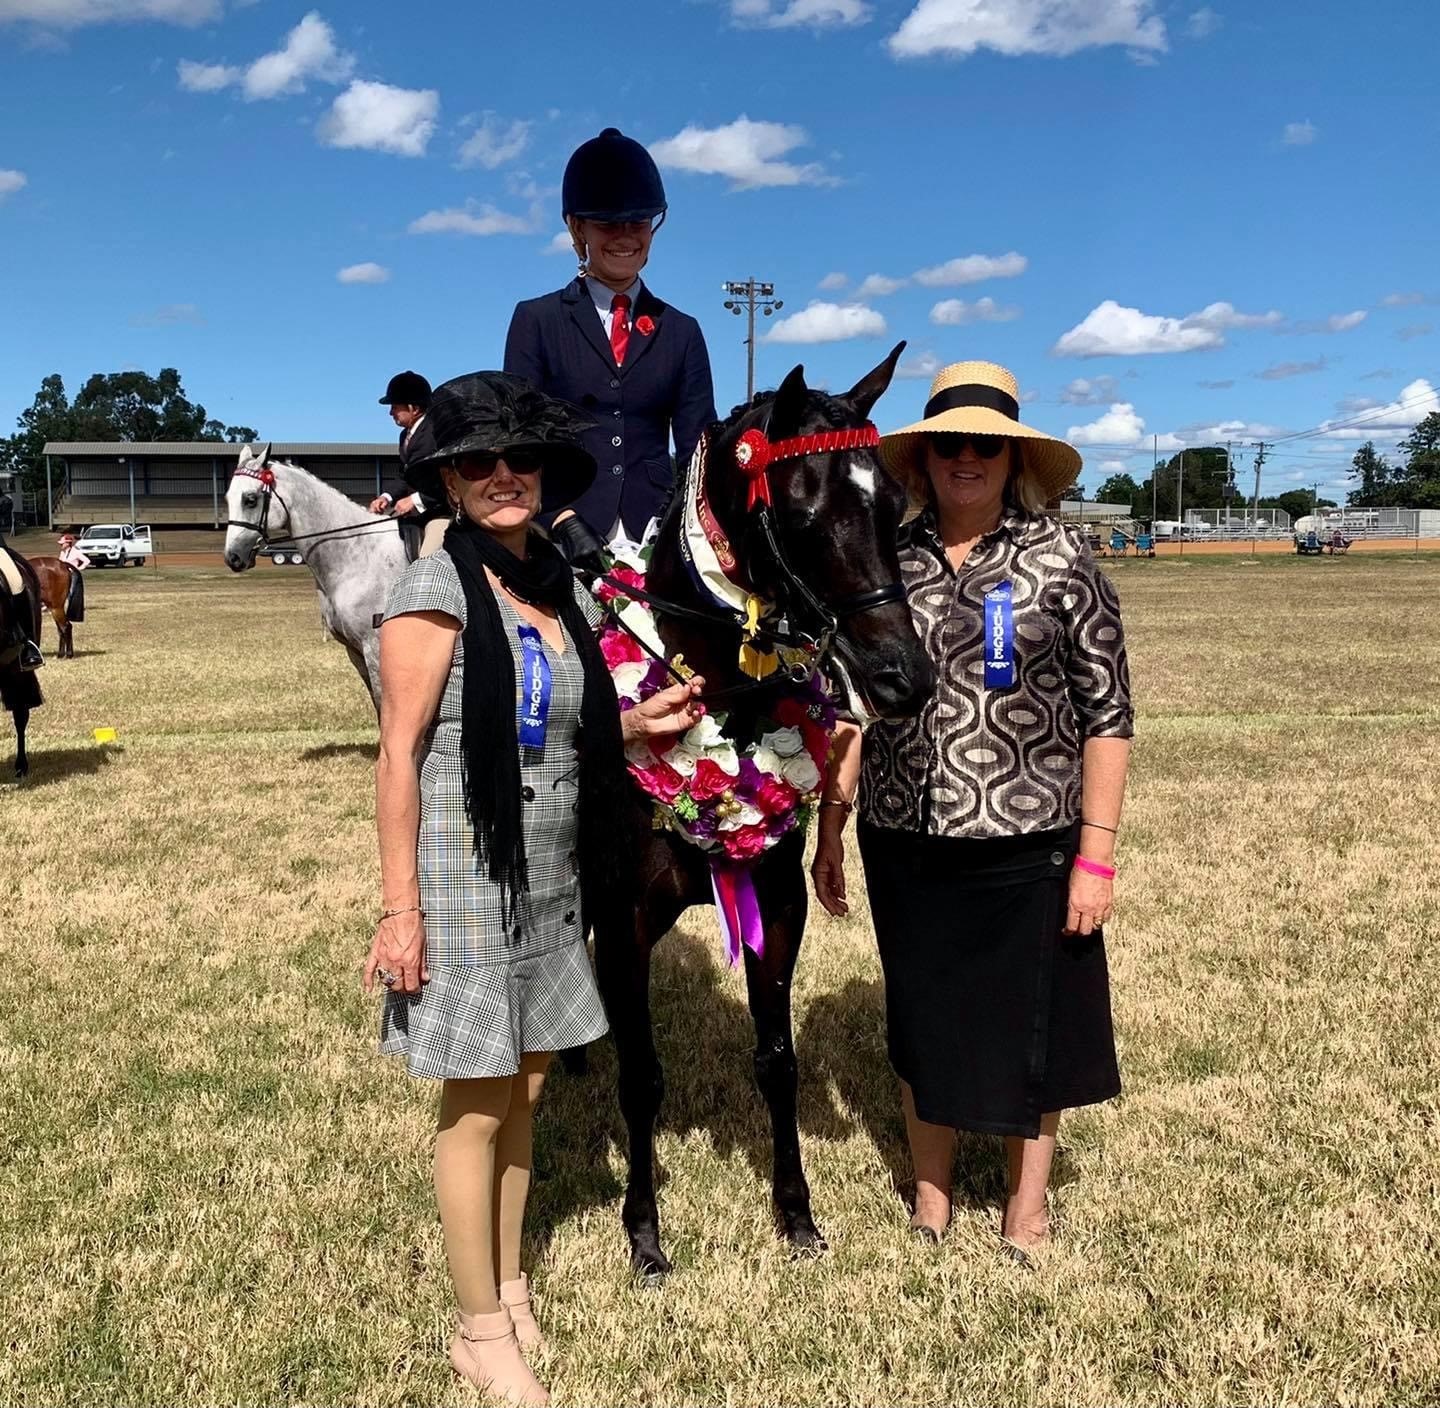 Supreme champion hack was awarded to Amelia Kearney riding Lyndhurst Miss Hong Kong. She is with judges Catherine Mills and Sue Foreman.